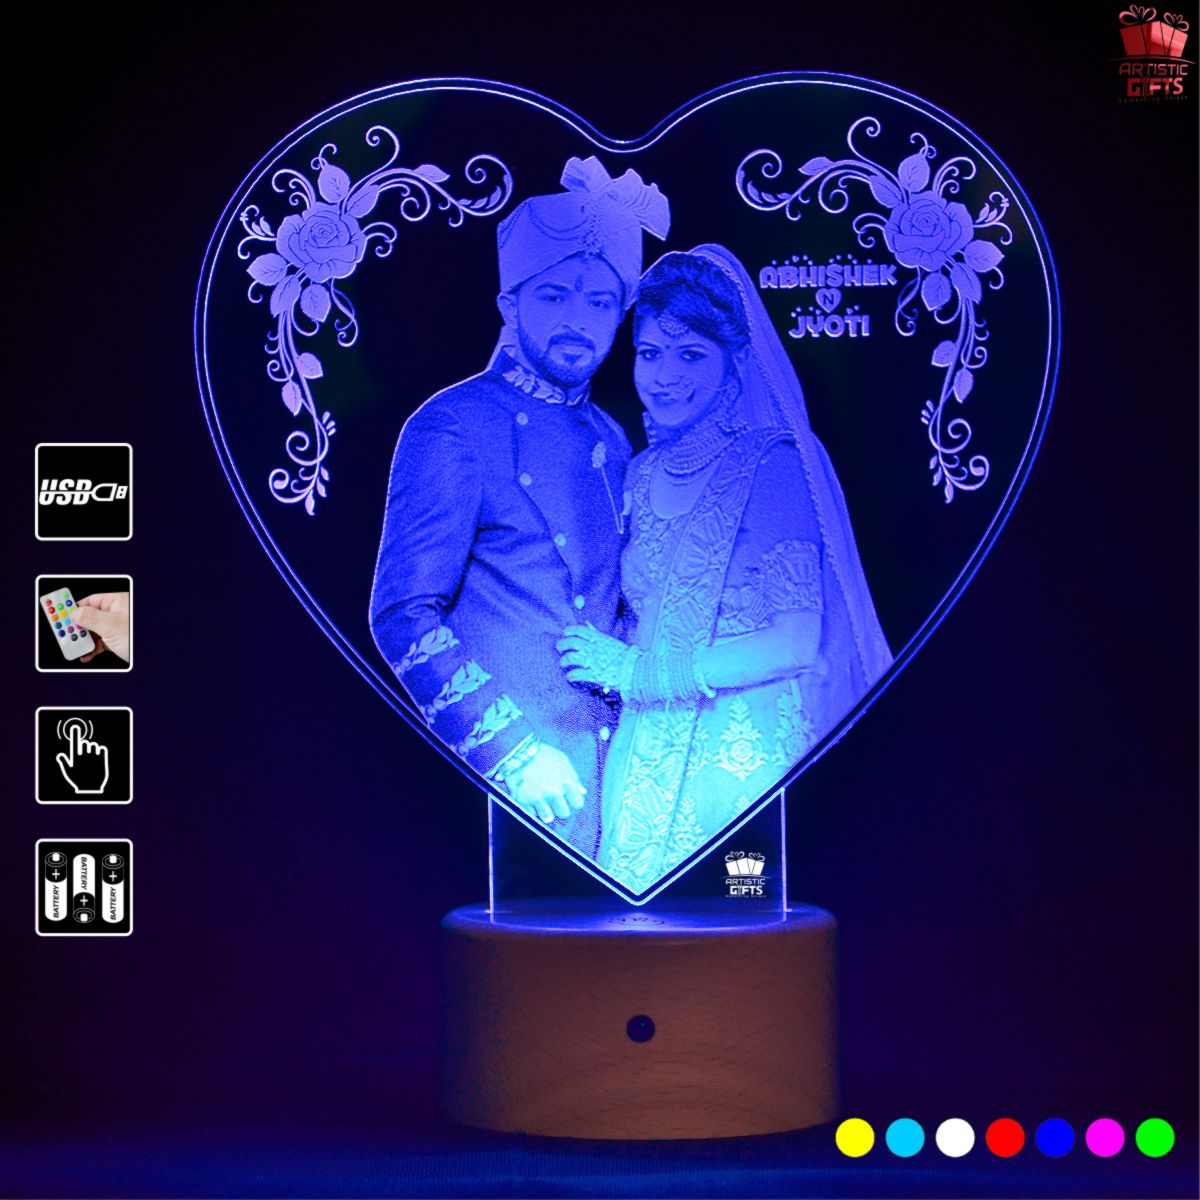 I Love You Personalized LED Lamp: Gift/Send Valentine's Day Gifts Online  J11154031 |IGP.com